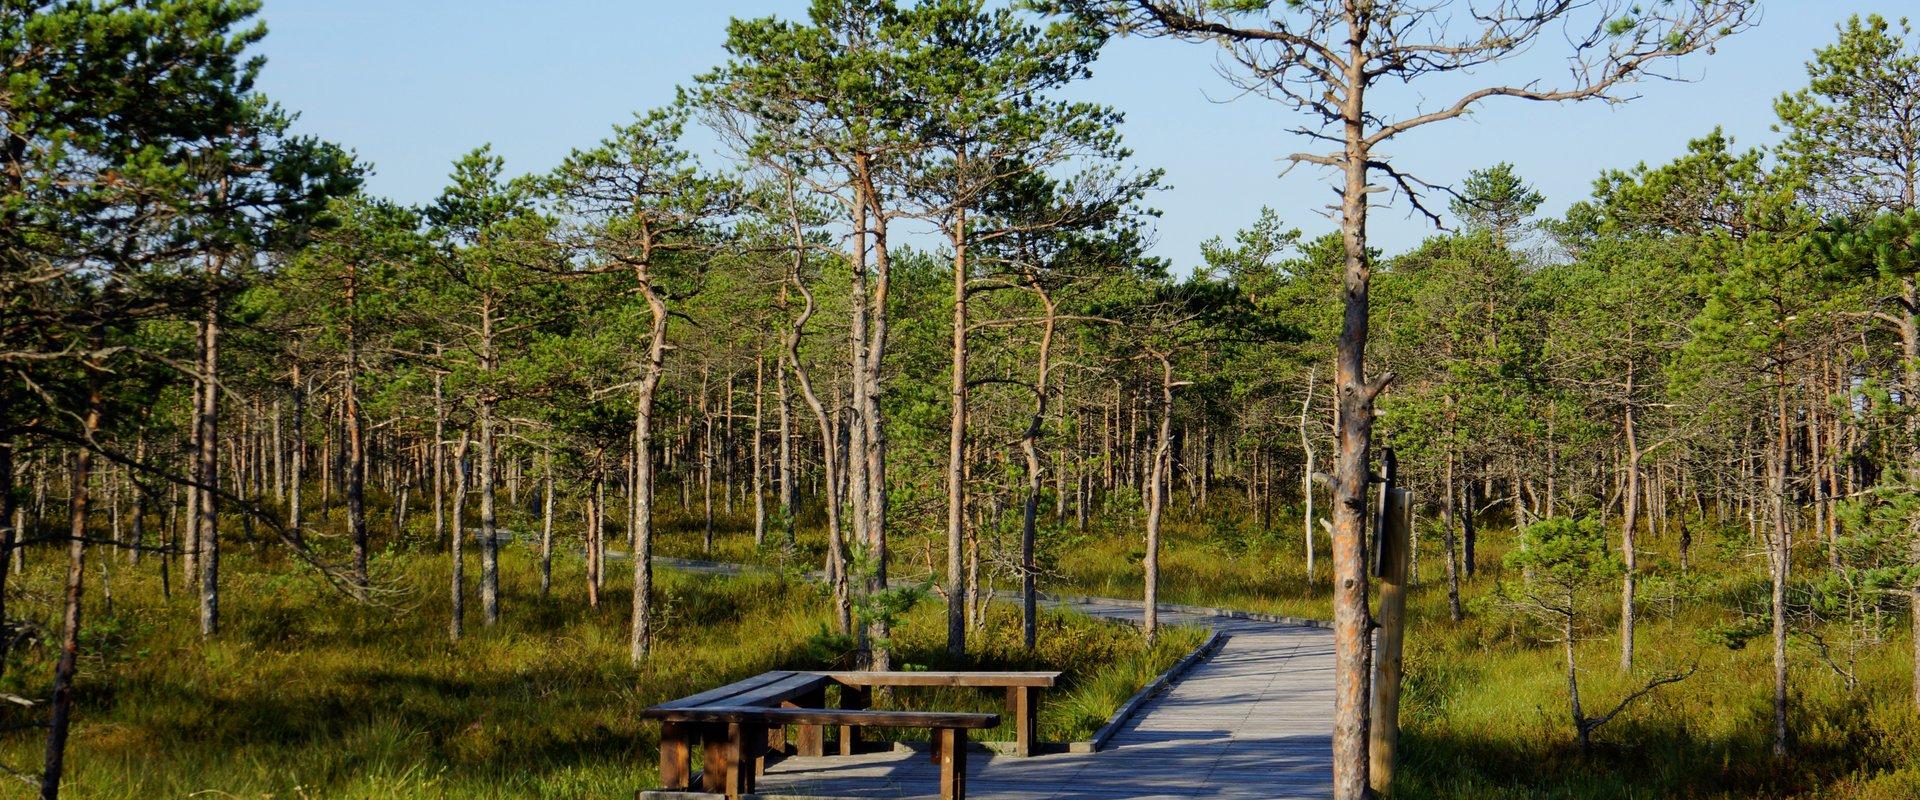 Cabins for hikers, an observation tower and a boardwalk attract many nature lovers to the Meenikunno bog. It is a beautiful recreation area. While wal